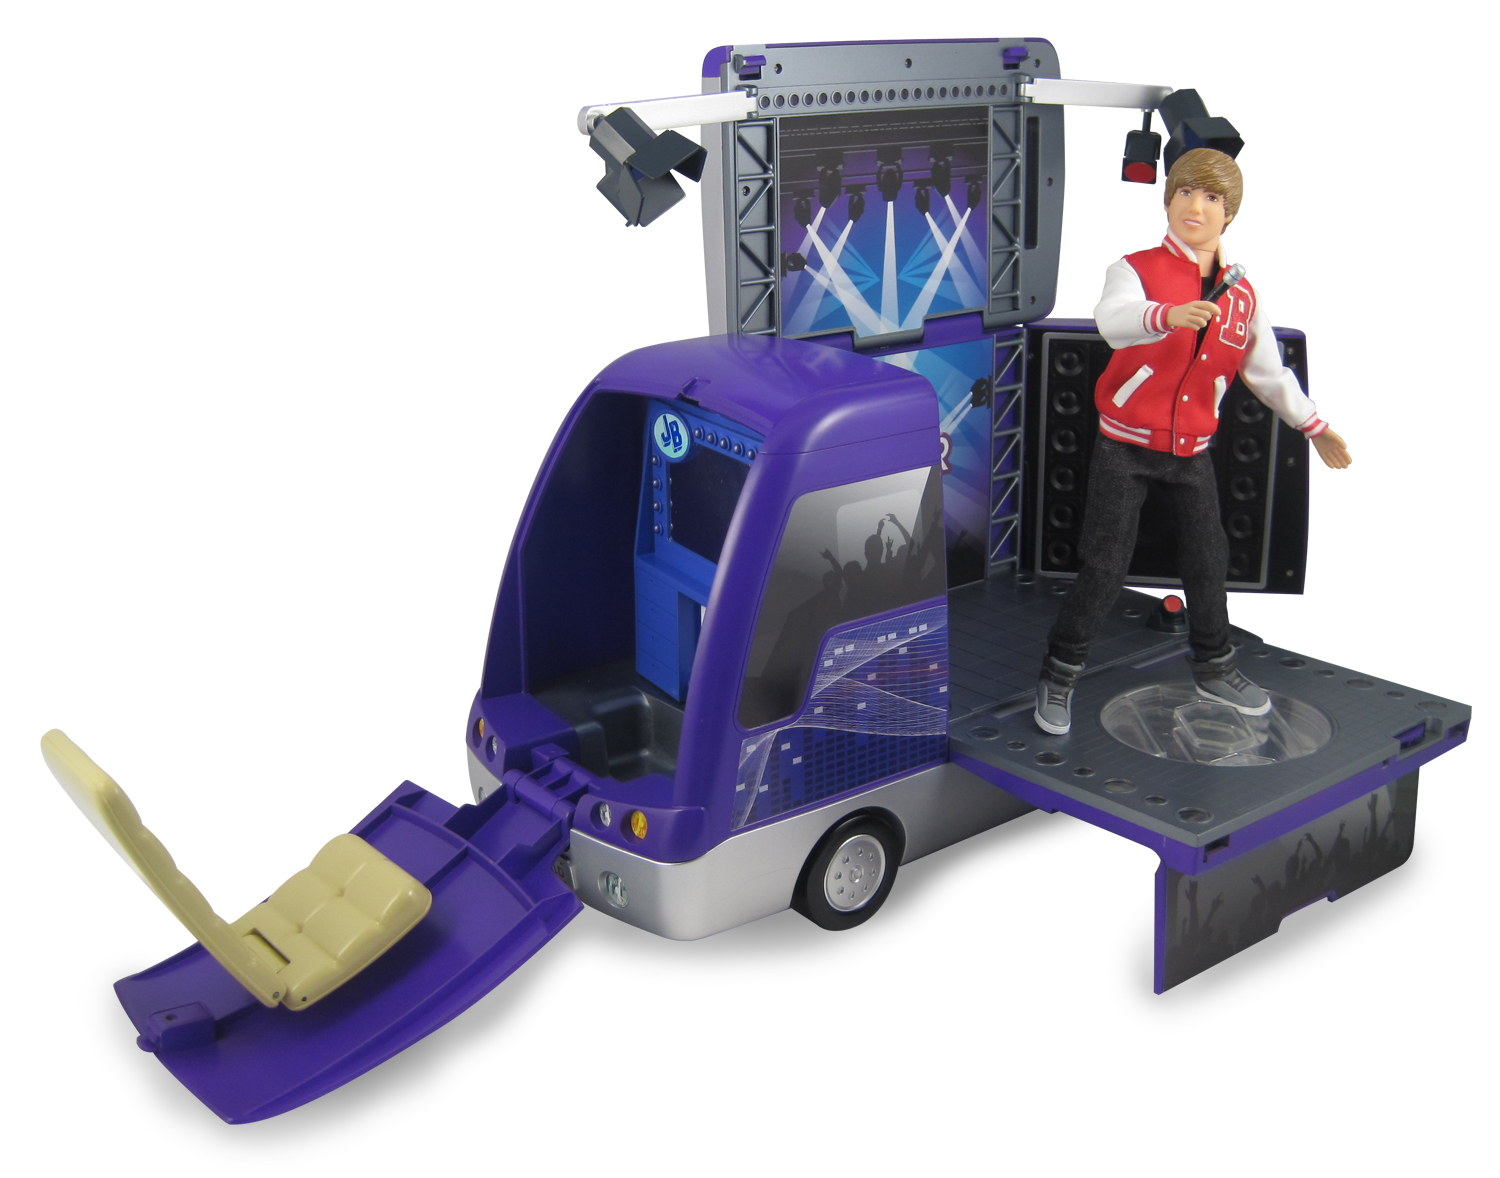 The 2011 Justin Bieber Toy Collection Unveiled at New York 